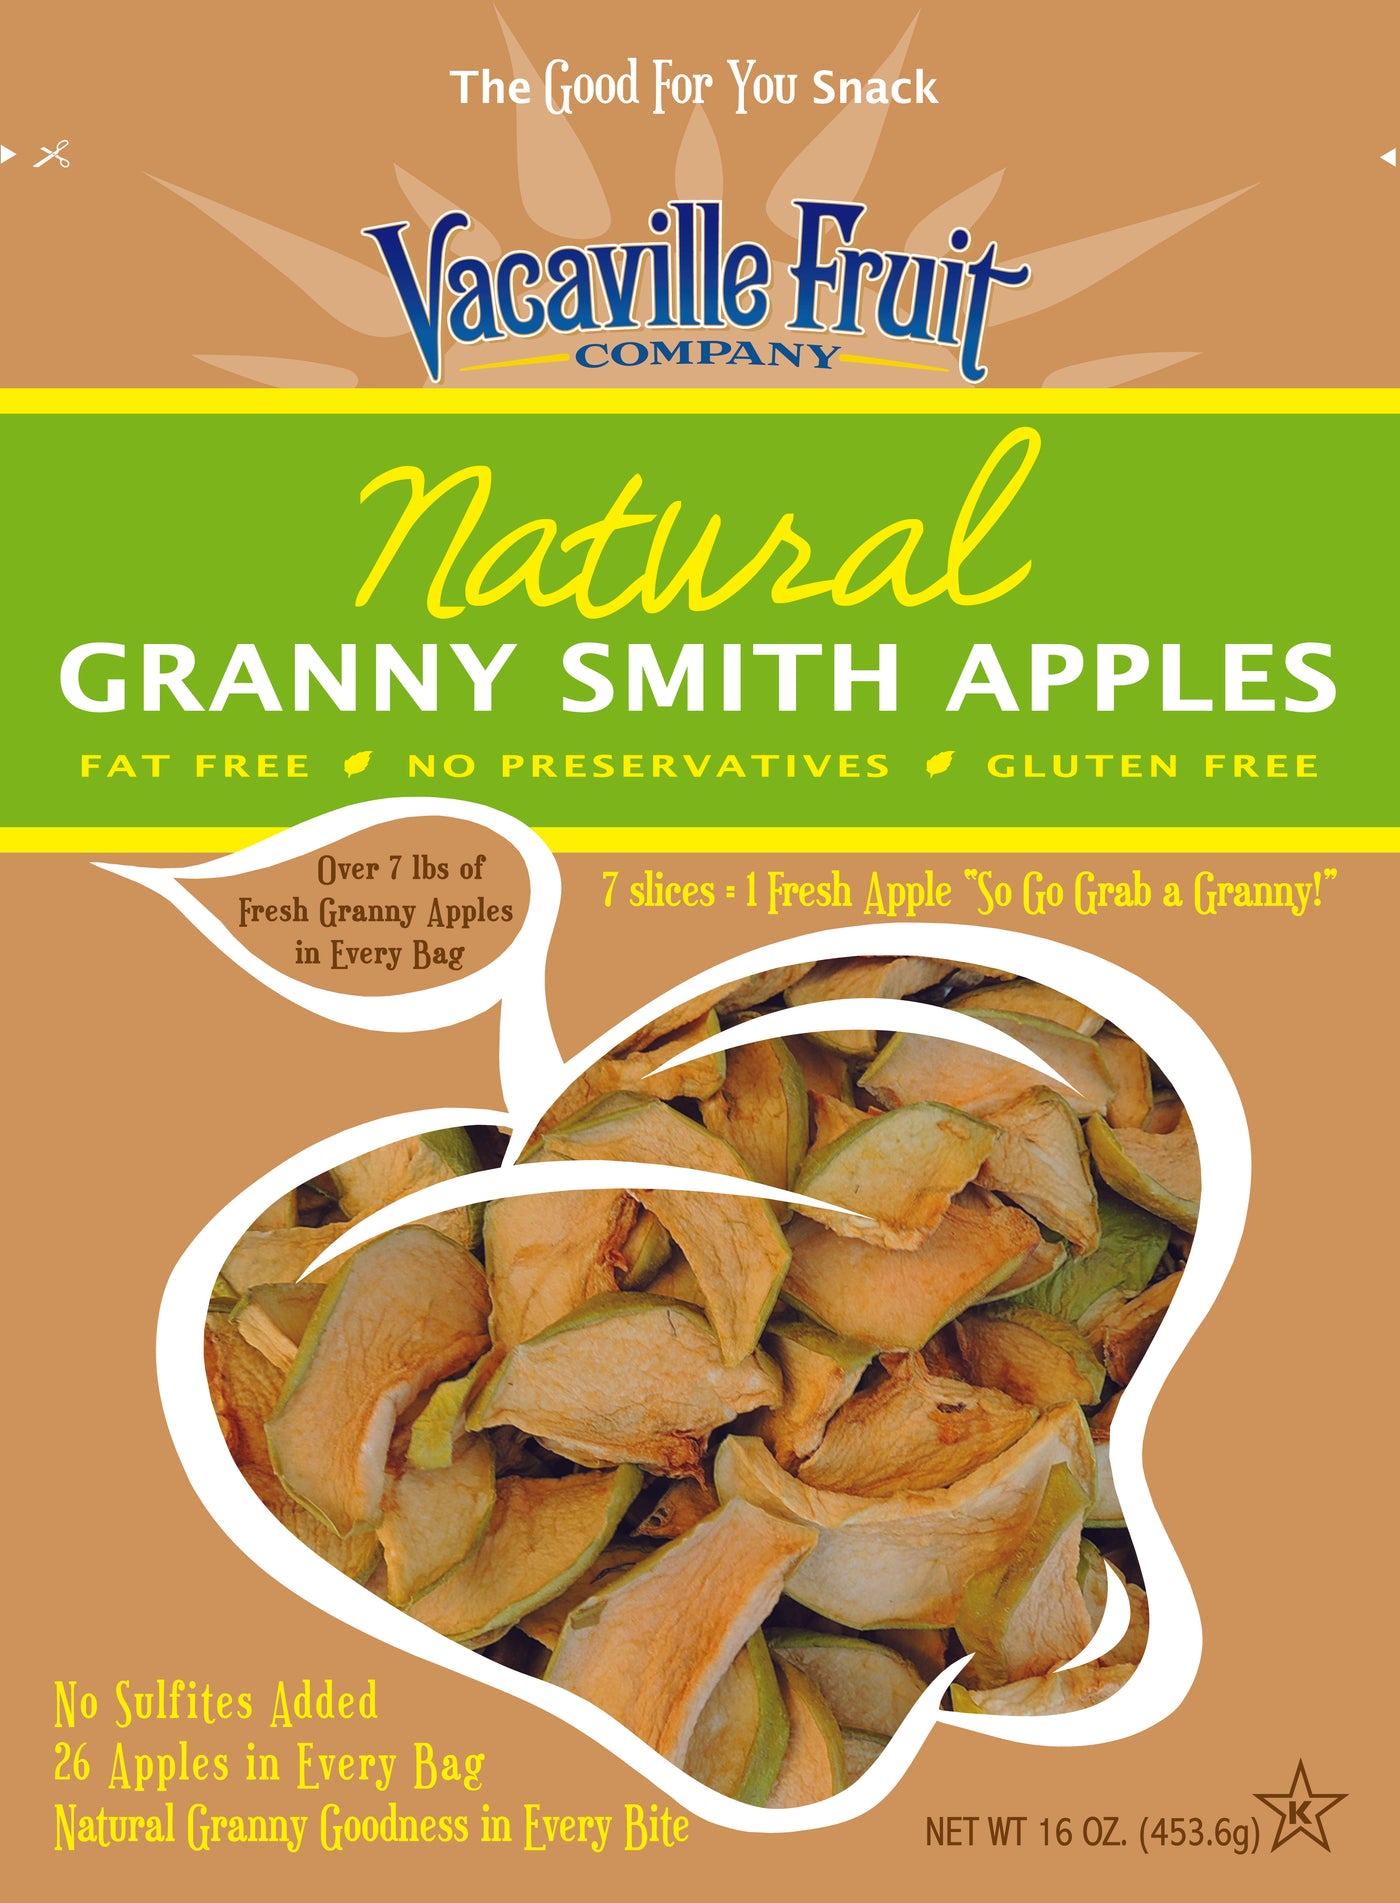 Granny Smith Apples from The Fruit Company